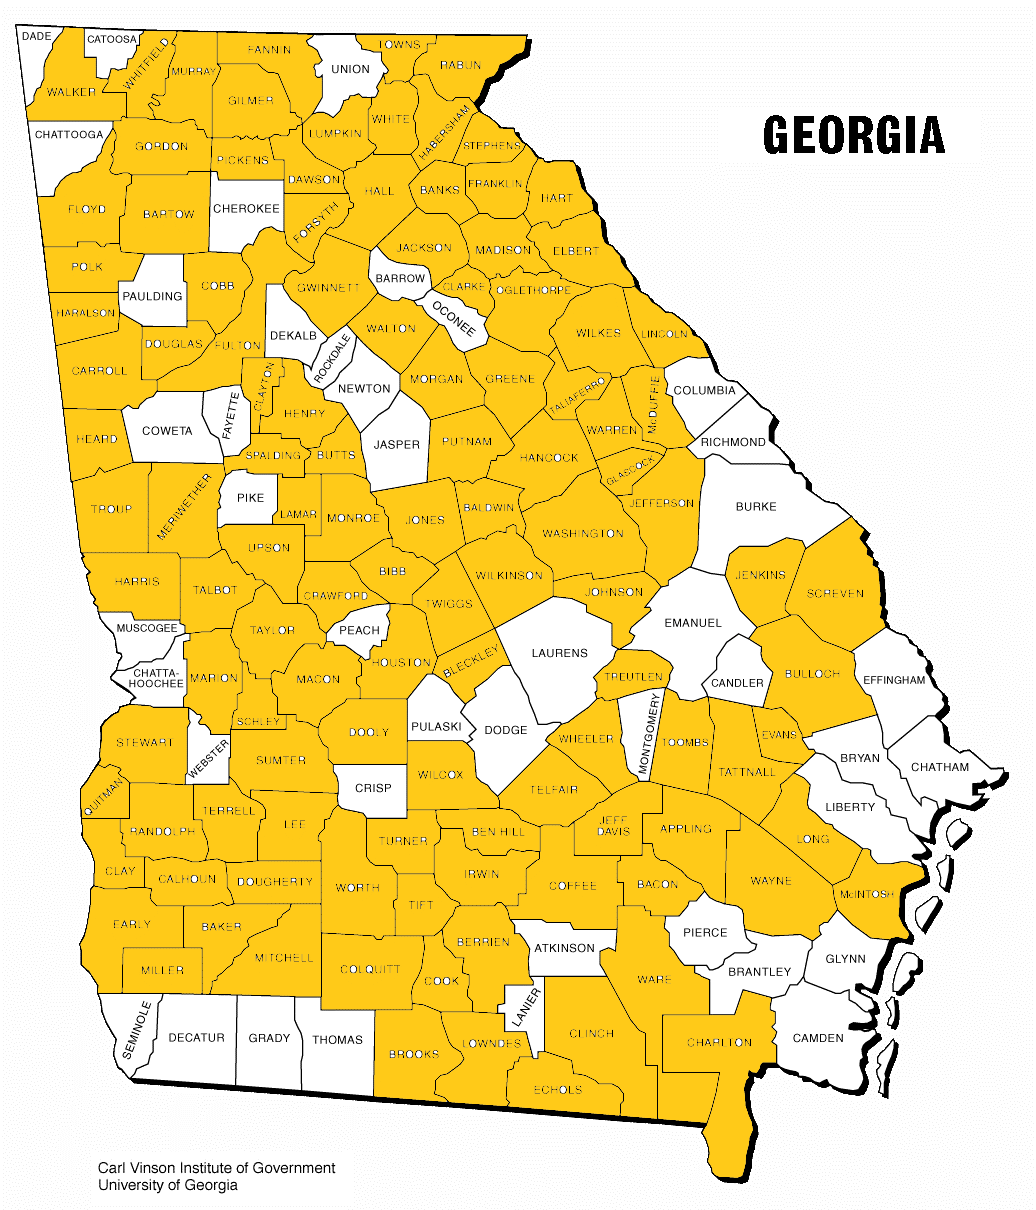 How many of Georgia's counties are named after slave owners? | Of ...